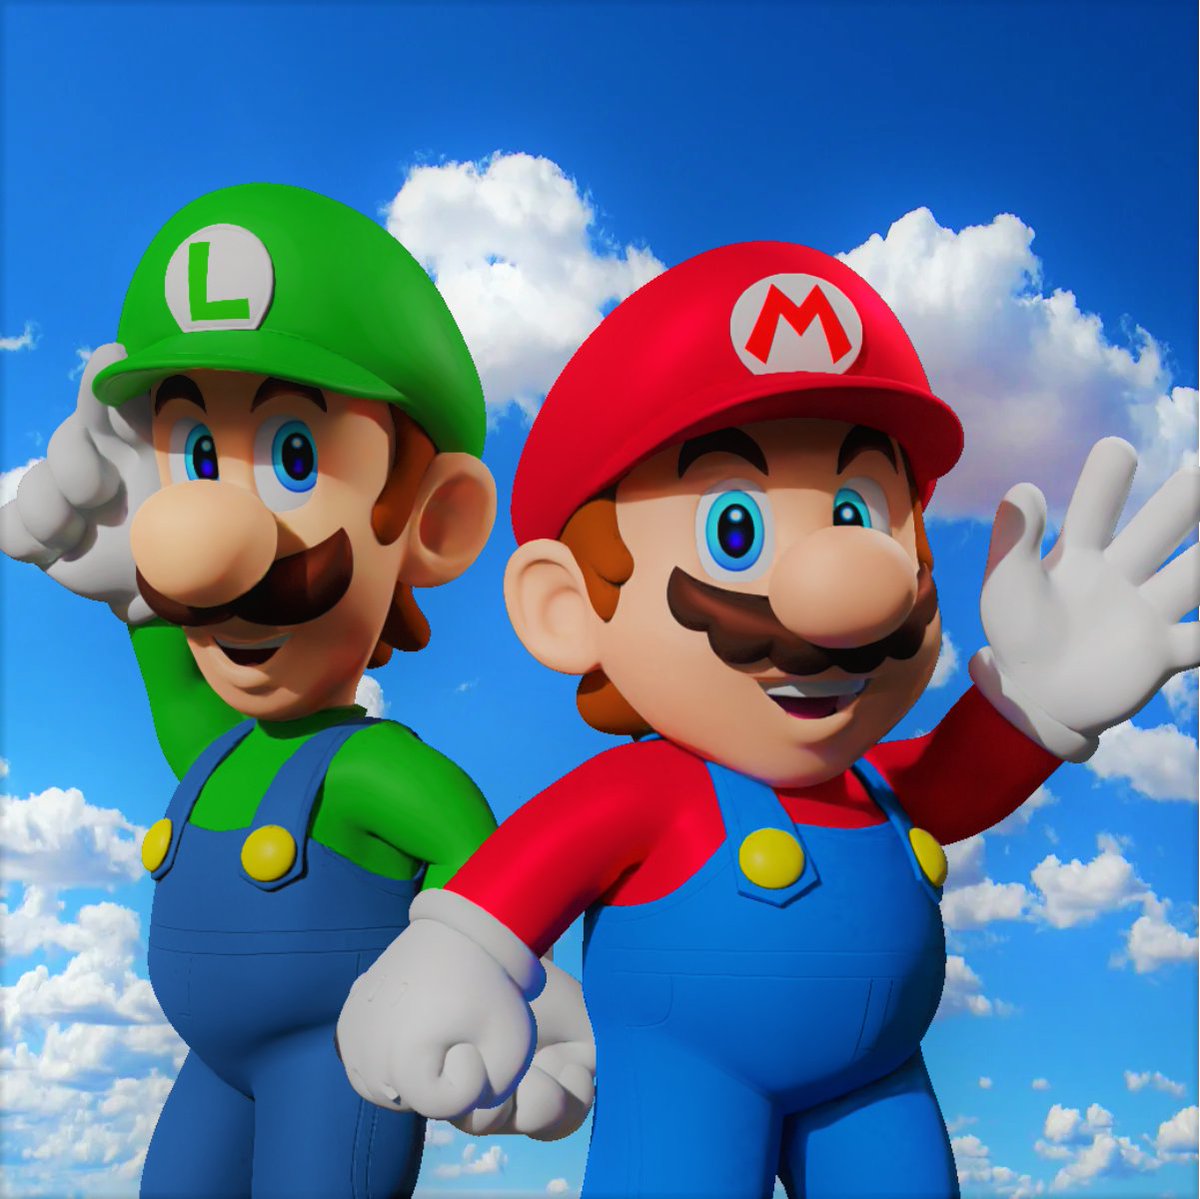 Tried out the @SRWProject models, and my God, They are amazing, #SuperMario #SuperMarioBros #Blender3D #BlenderCycles #SuperMarioBrosWonder #Mario #Luigi #MarioMario #LuigiMario #Nintendo